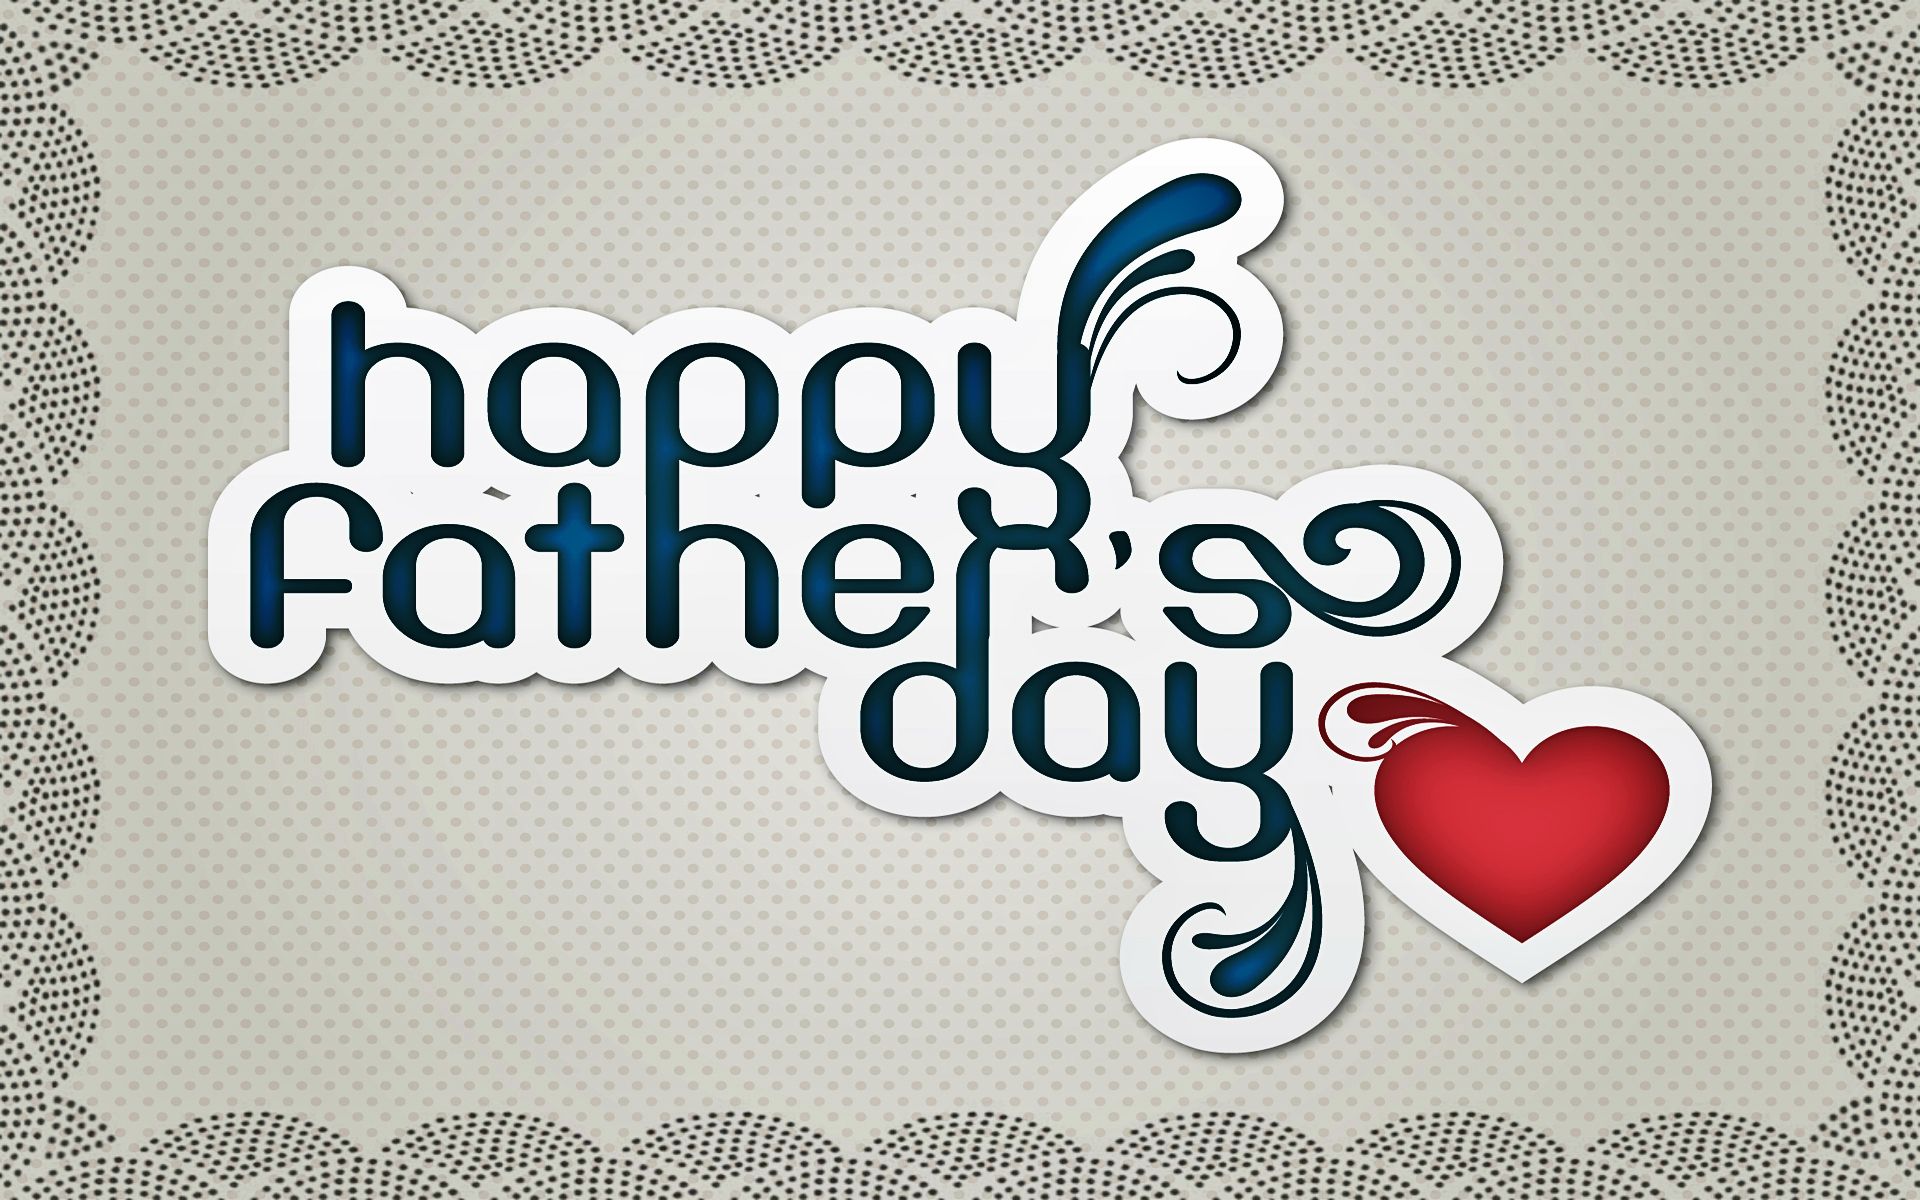 Father's Day HD Wallpaper. Background Imagex1200